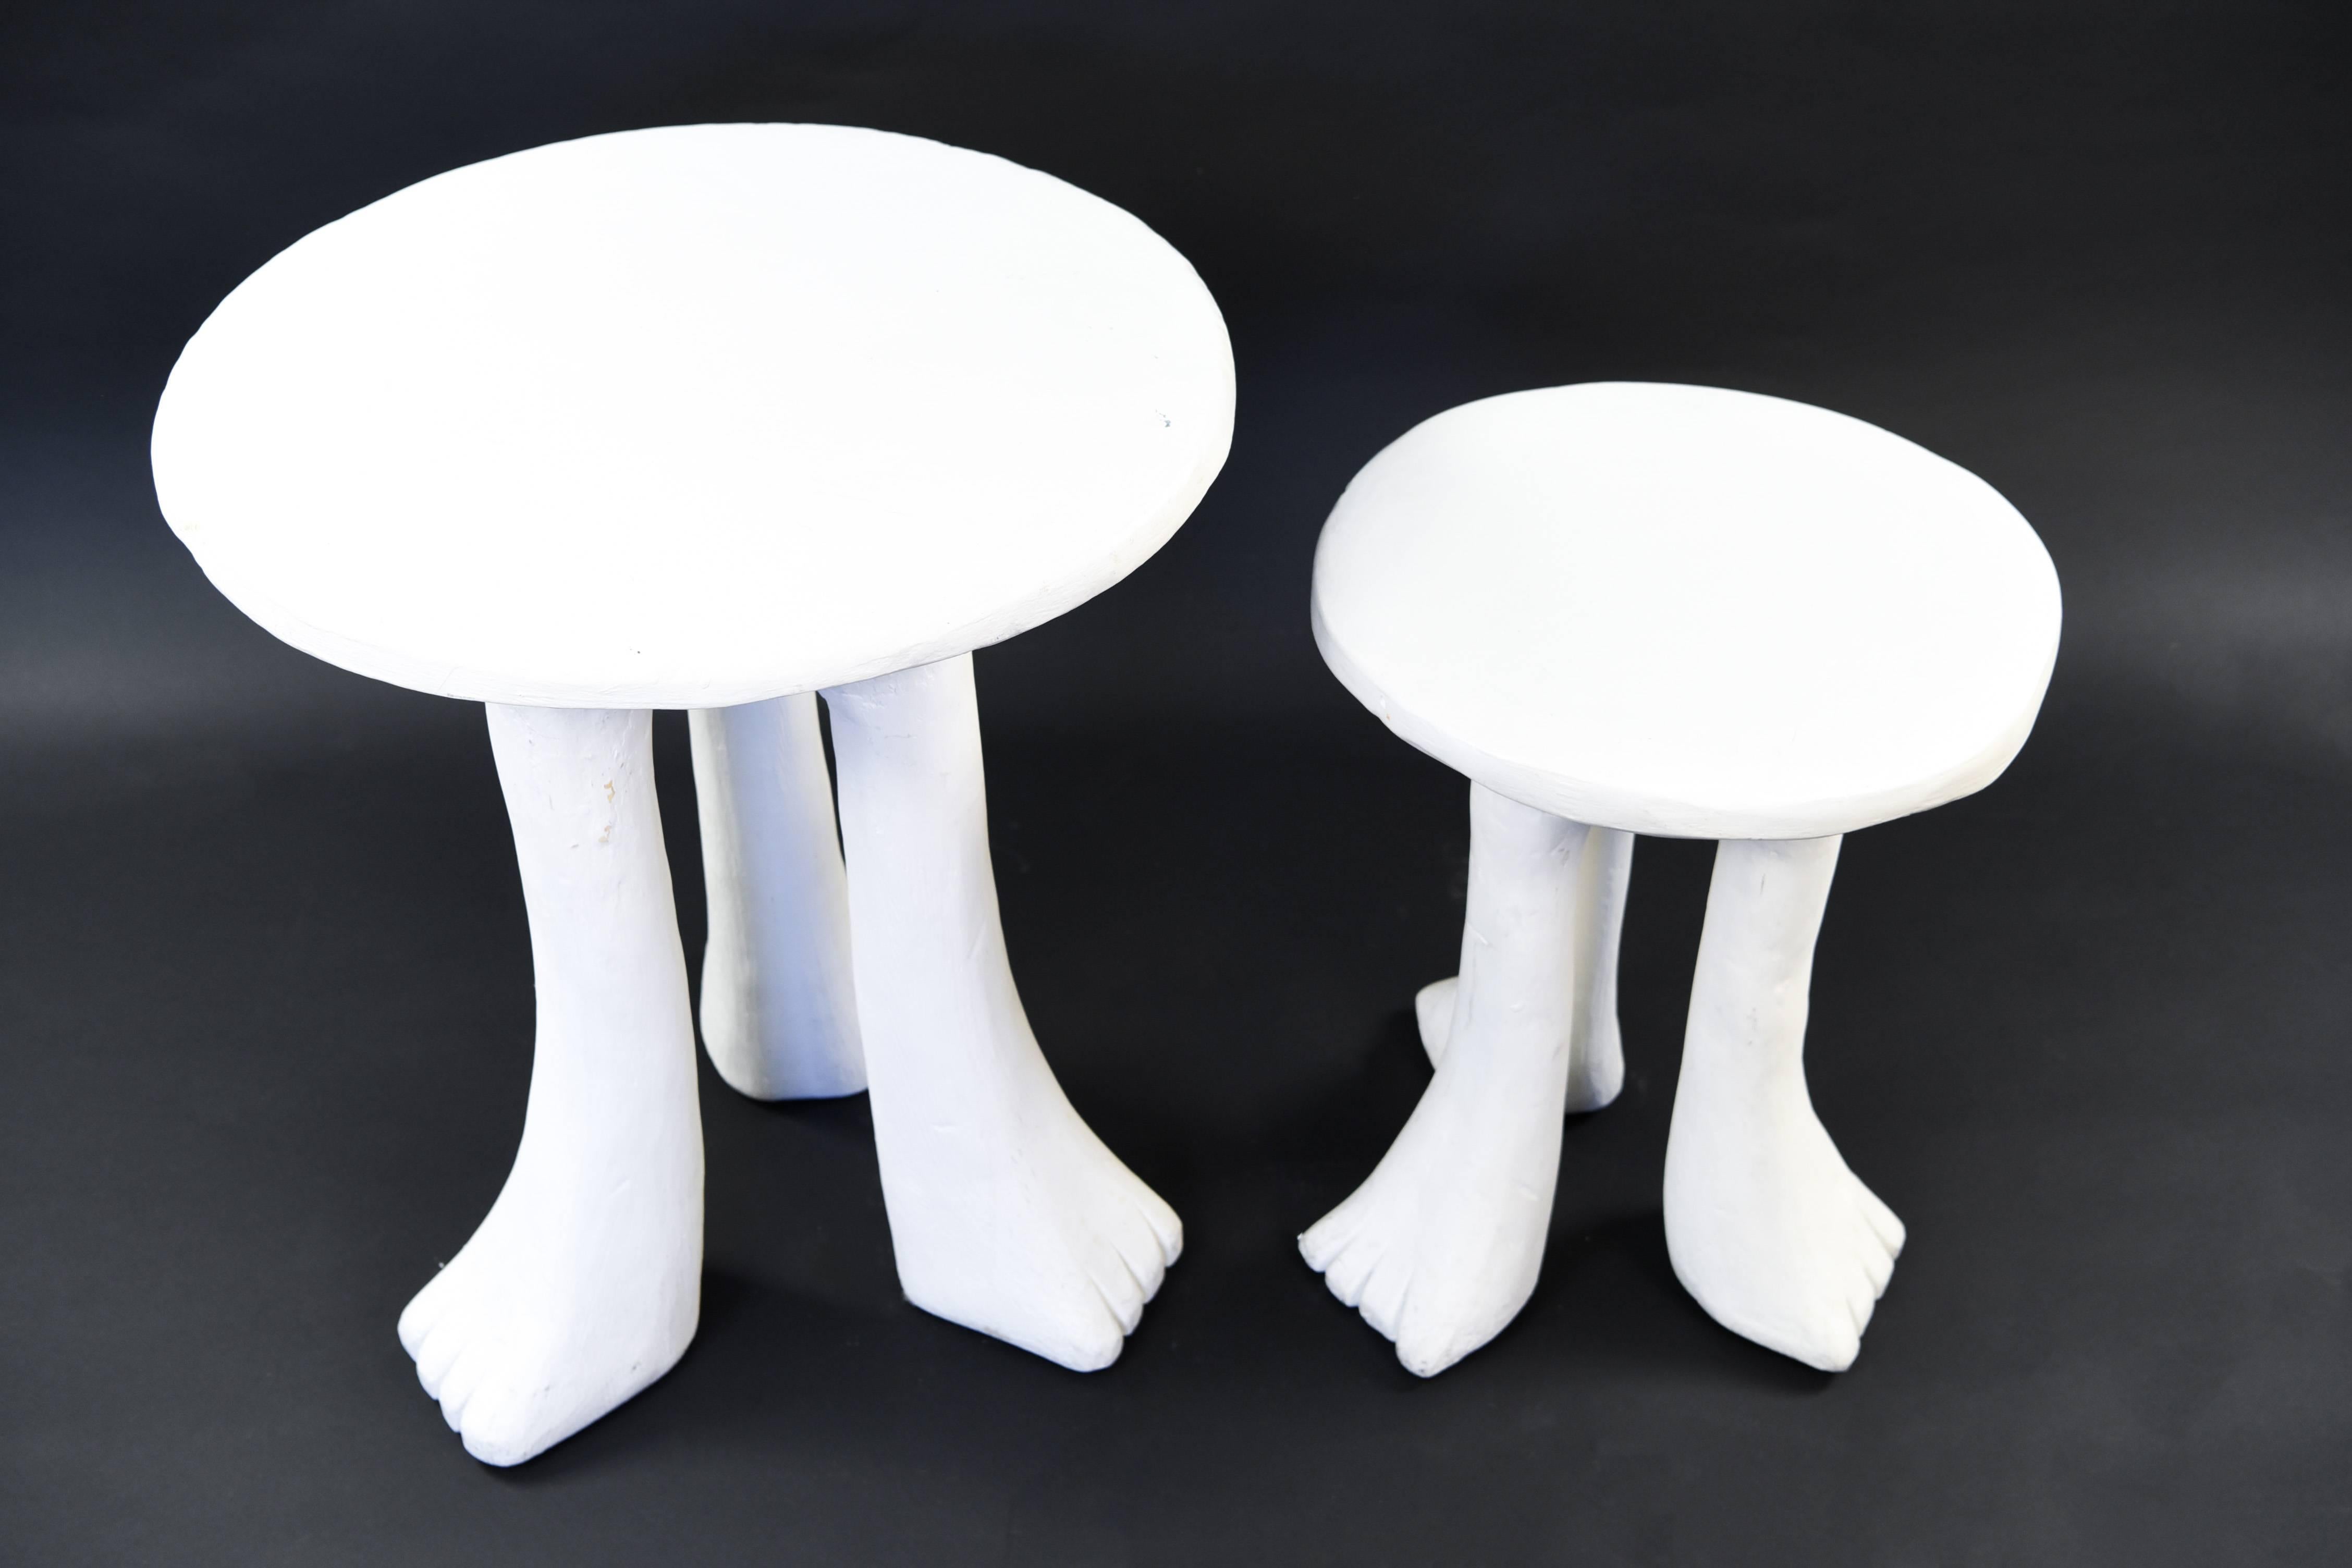 Two iconic John Dickinson plaster and gesso three-legged Africa tables of different sizes, circa 1970s. A fun, whimsical example of Dickinson's work, these tables feature animal paw feet that extend from three legs. These playful pieces combine